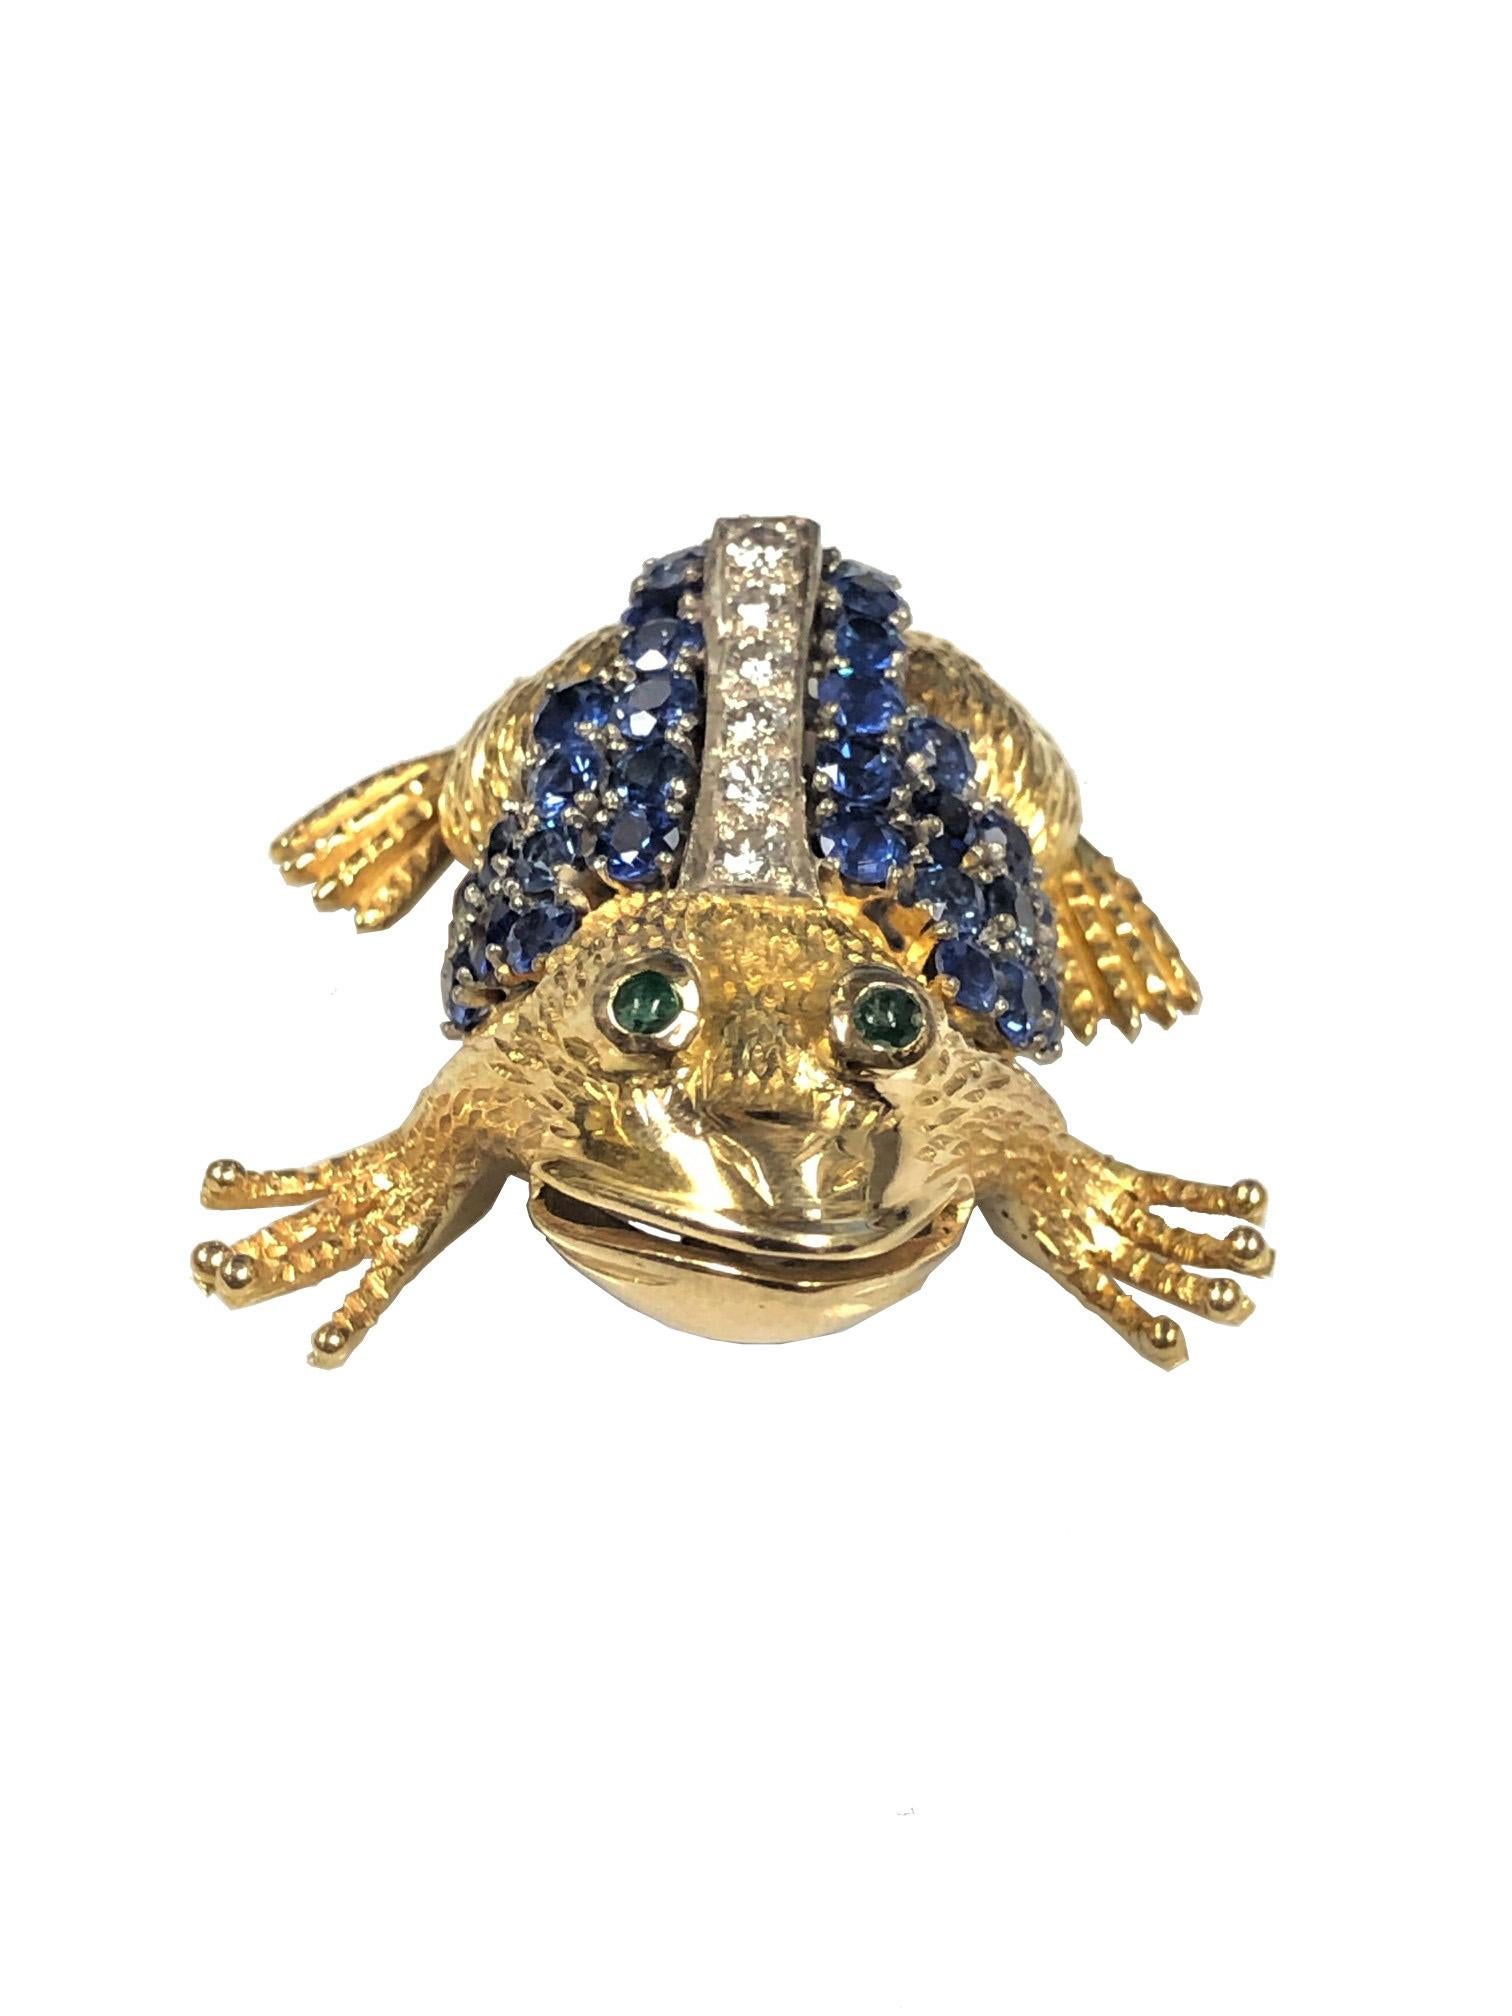 Circa 1970s 14K Yellow Gold Frog Brooch, measuring 1 1/2 X 1 1/2 inch and weighing 17.4 Grams, set with Round Brilliant cut Diamonds totaling 1/2 carat furthers set with Sapphires of very fine color totaling 2 Carats and also set with cabochon